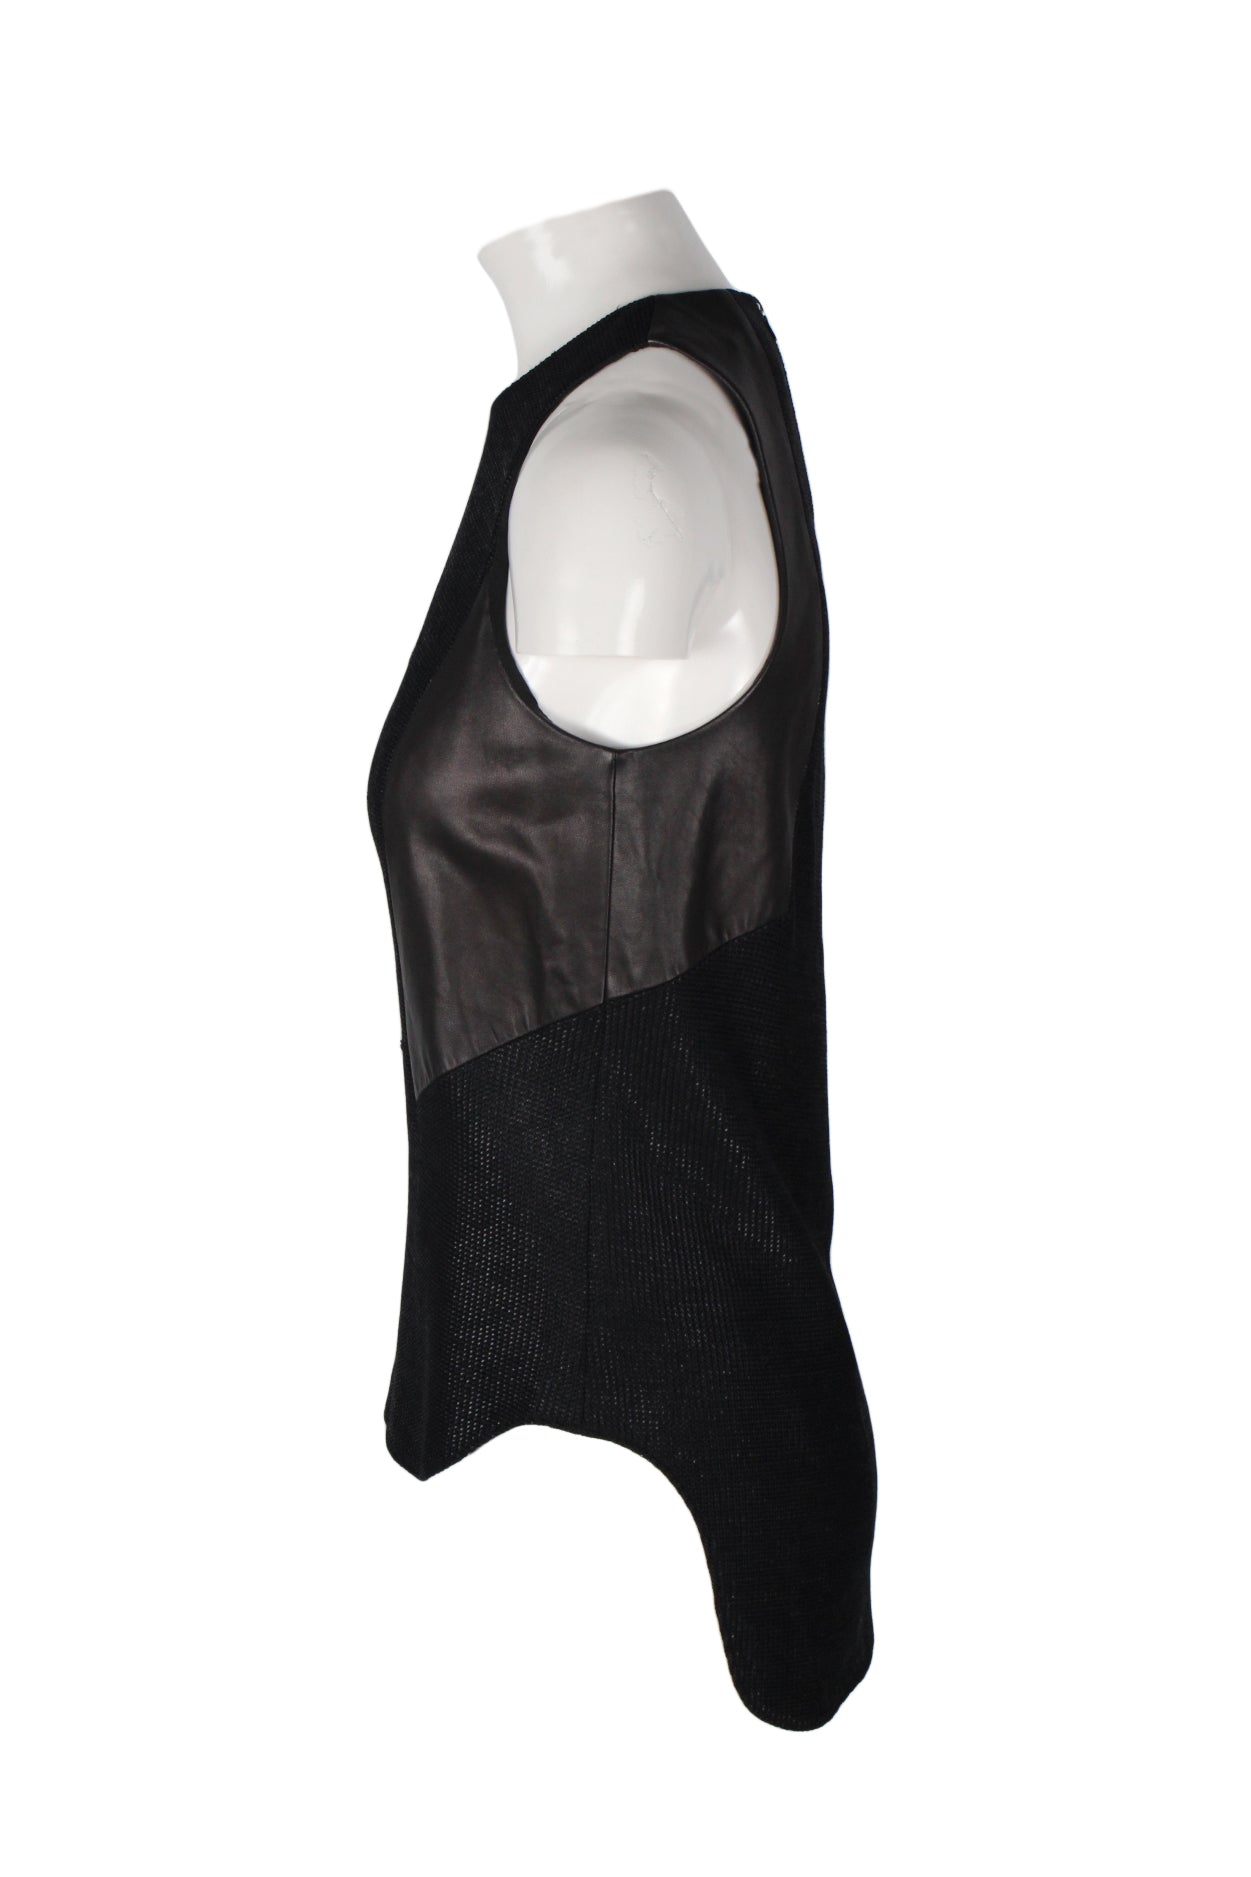 side angle of helmut lang sleeveless blouse. features leather panel under arm to waist, and rounded high/low hem. 